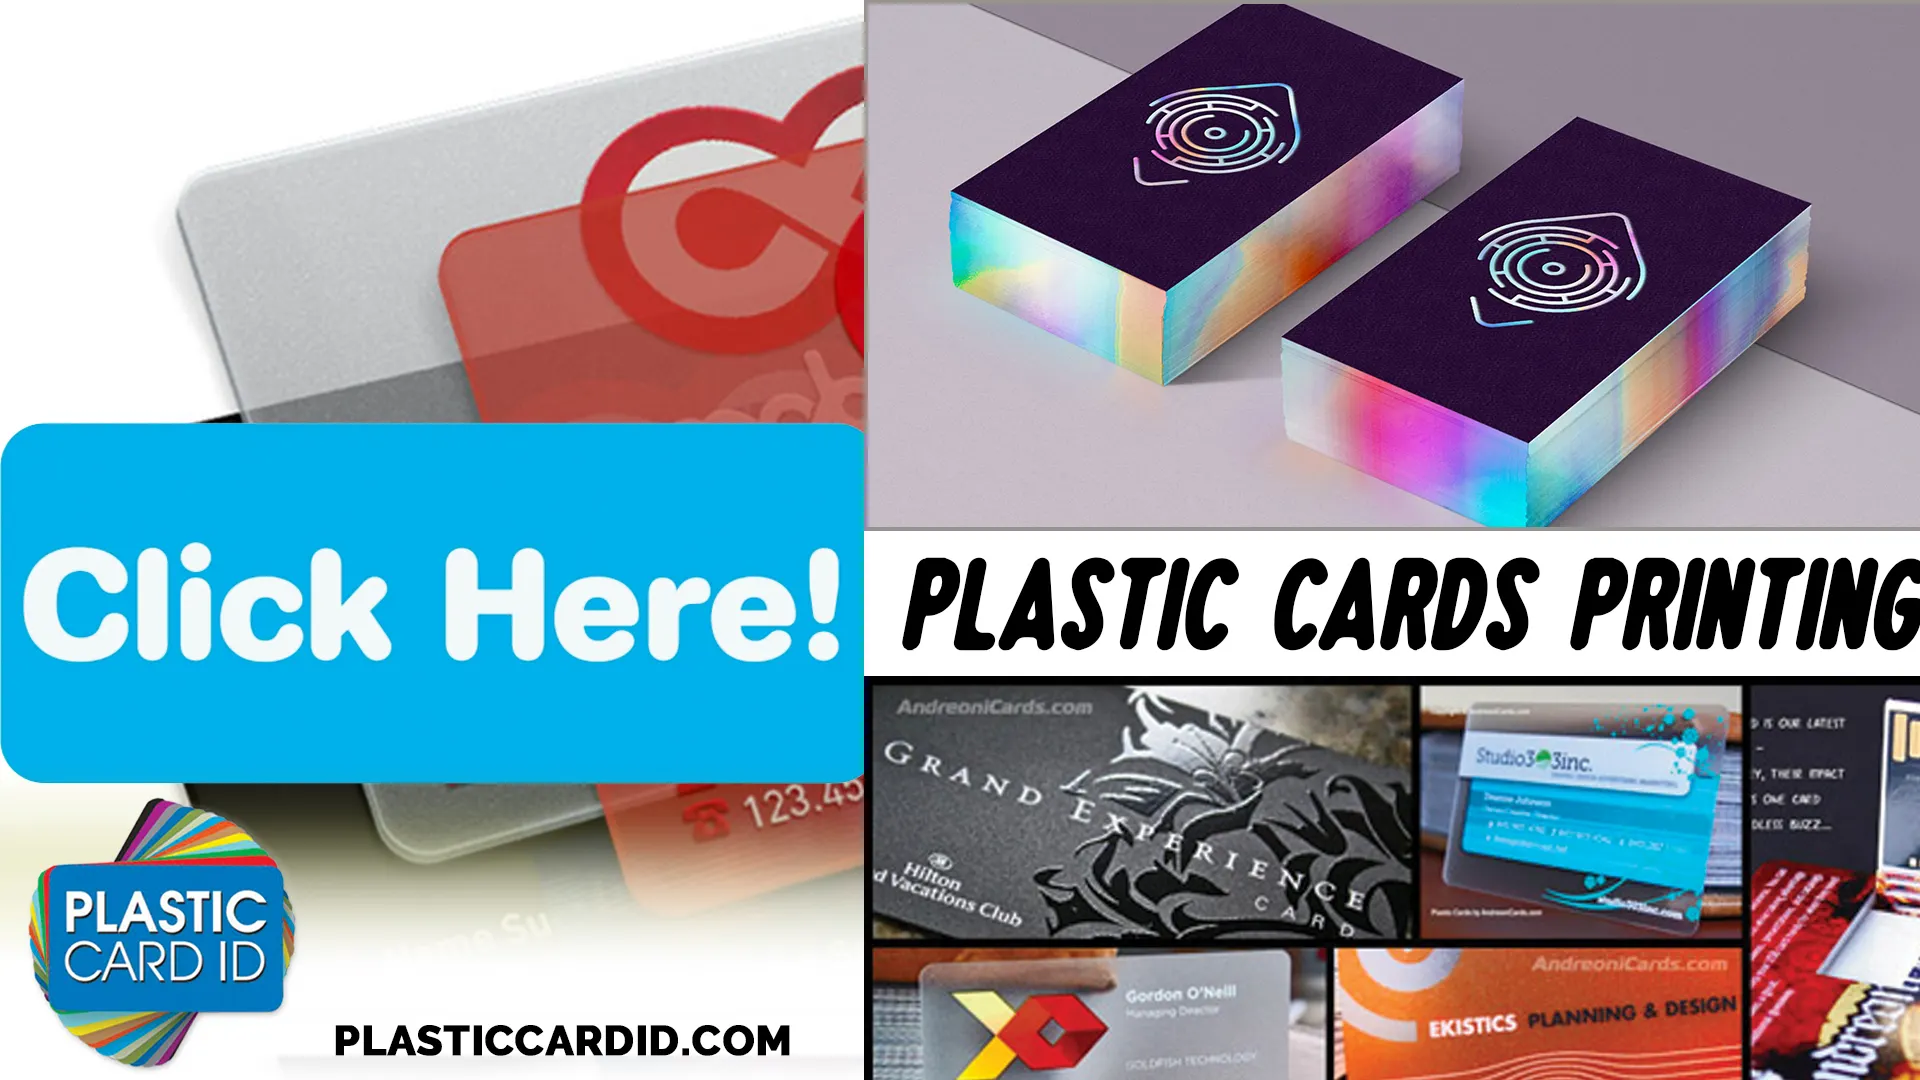 Embracing the Digital Future with Versatile Plastic Card Solutions